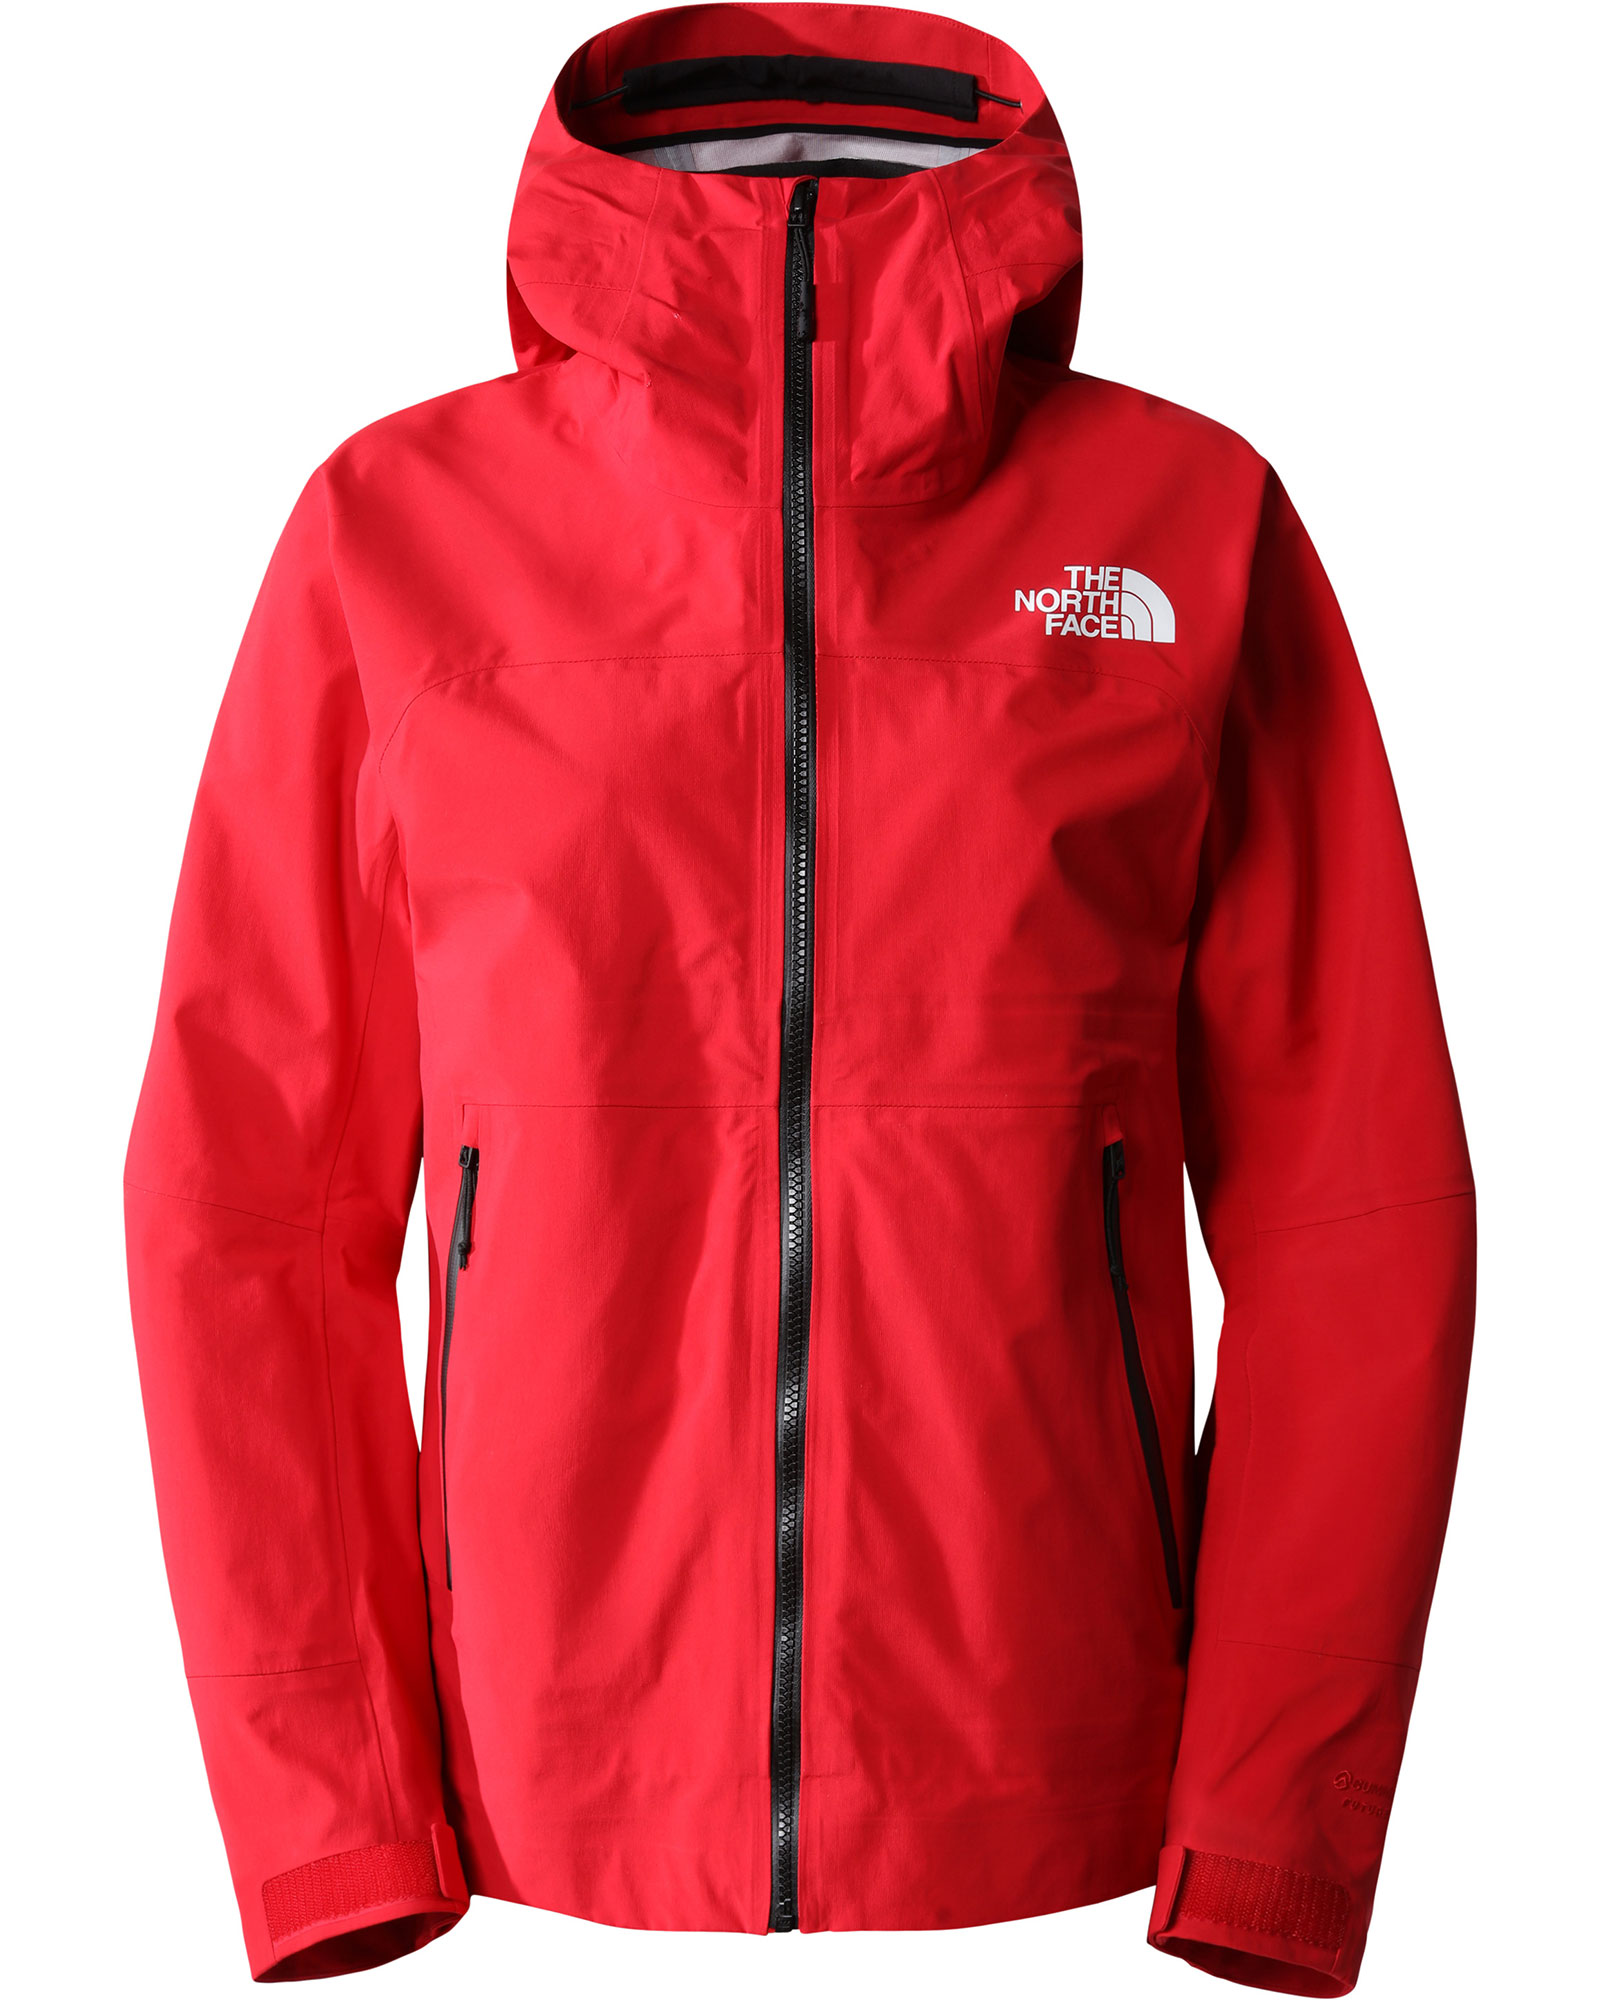 The North Face Summit Chamlang FUTURELIGHT Women’s Jacket - TNF Red S